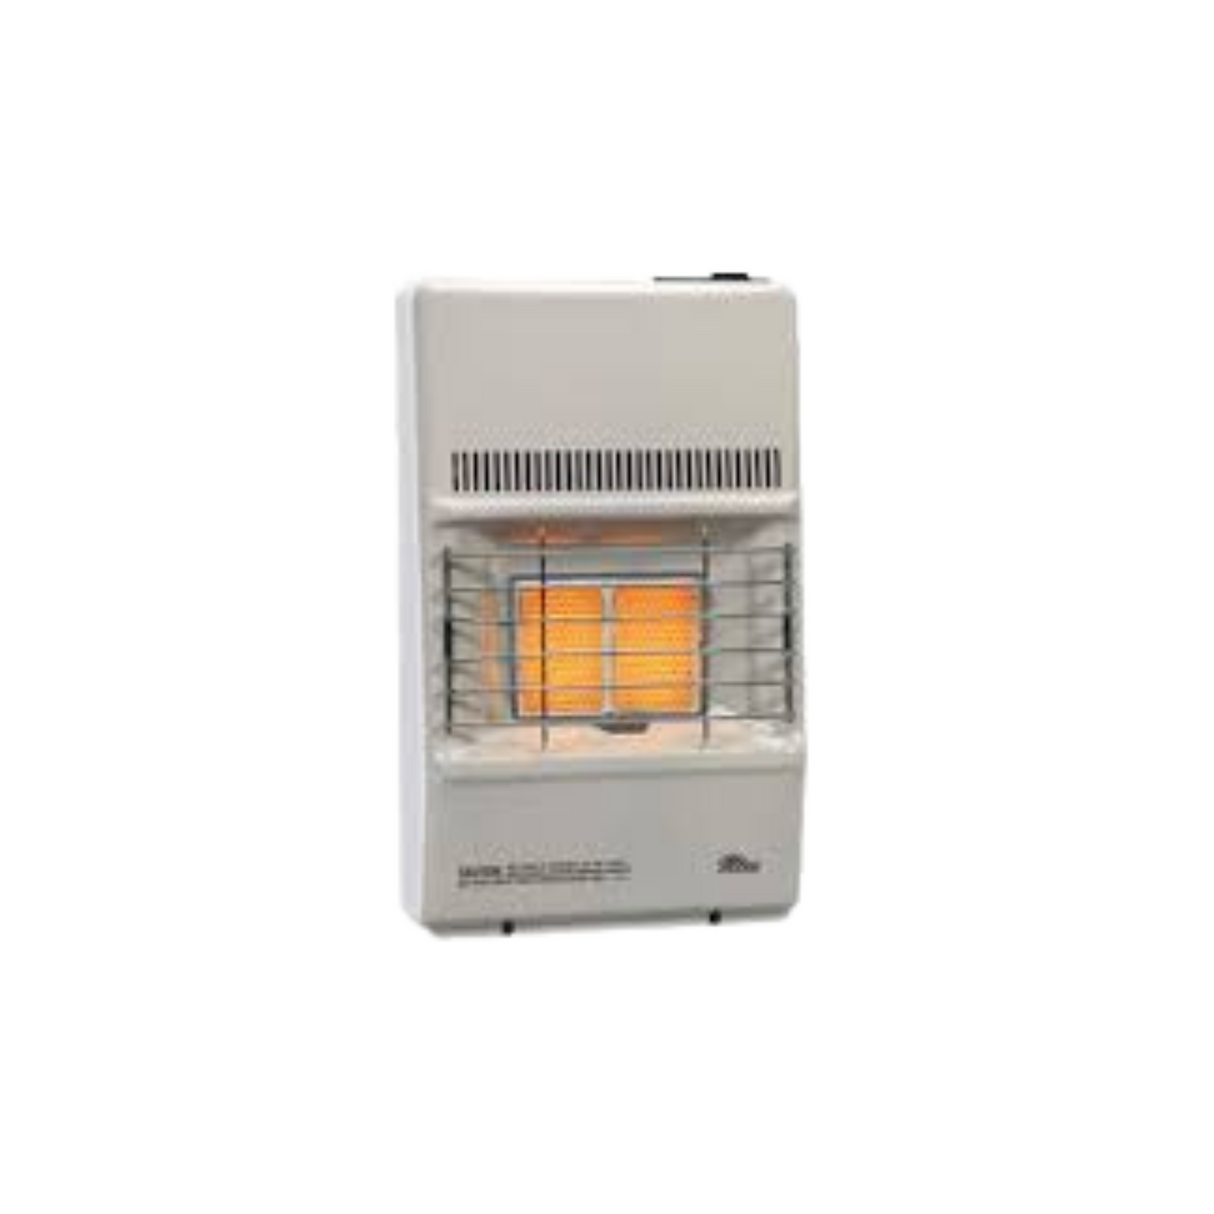 Sunstar Heating Products SC10T-N 9500 BTU Thermostatic Vent Free Infrared/Radiant Heater, Natural Gas